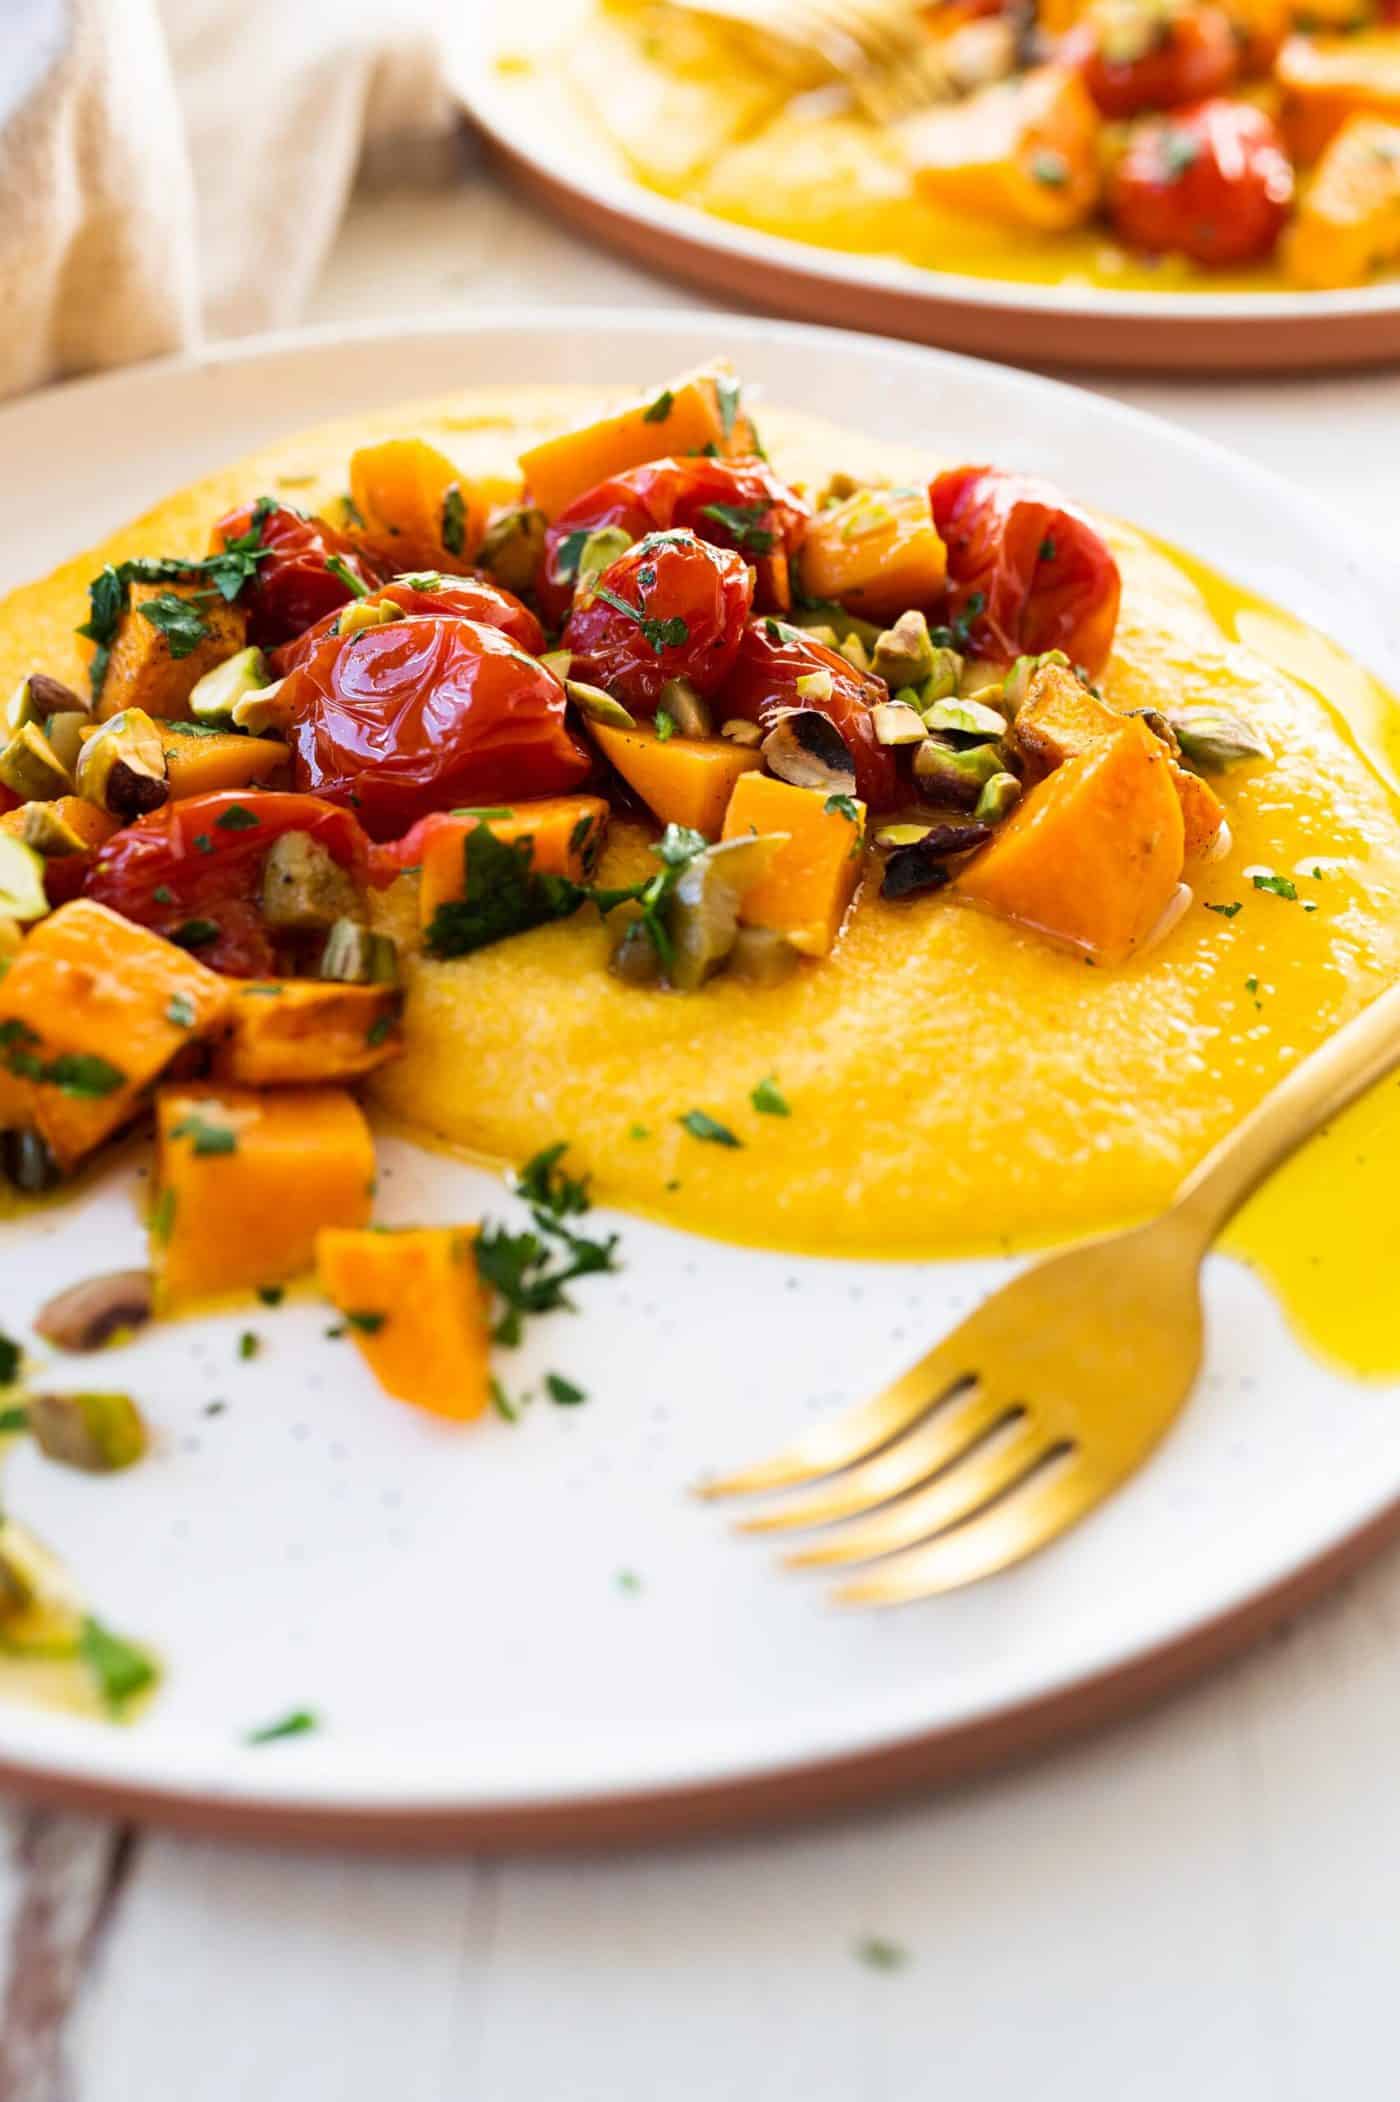 Vegan Grits Bowls with Roasted Sweet Potatoes and Tomatoes -- an easy weeknight vegan sheetpan meal (via thepigandquill.com)